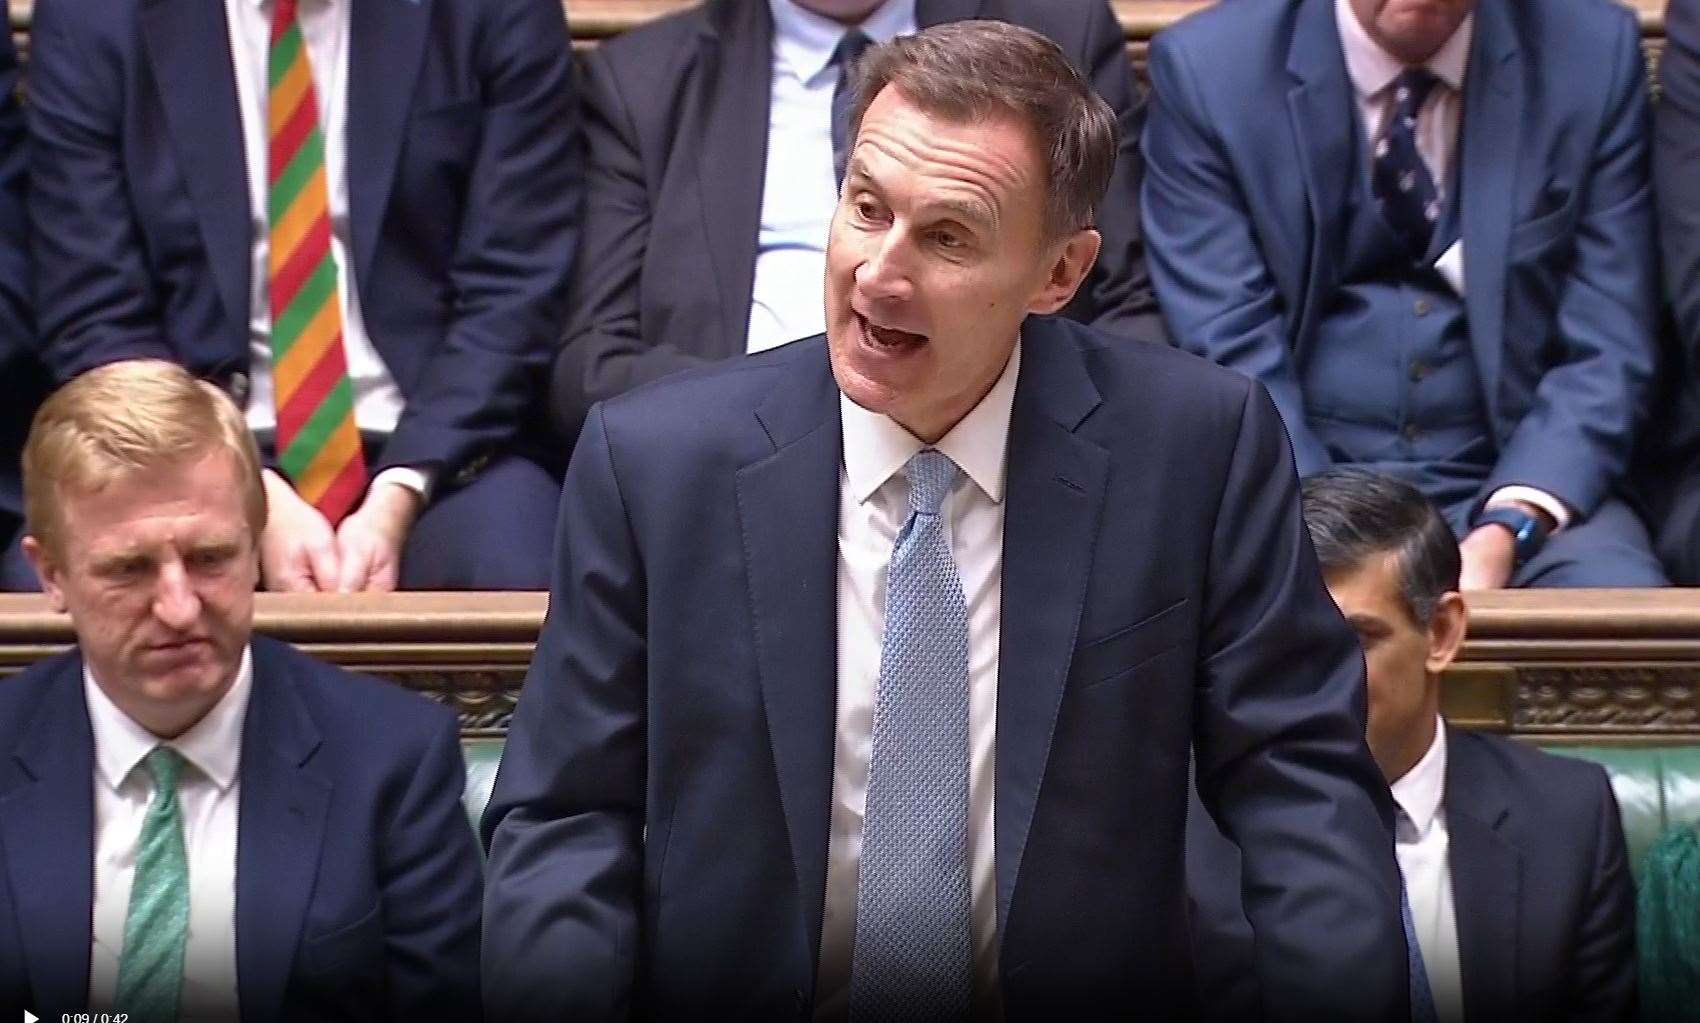 Jeremy Hunt delivering his Budget to the House of Commons (House of Commons/UK Parliament)